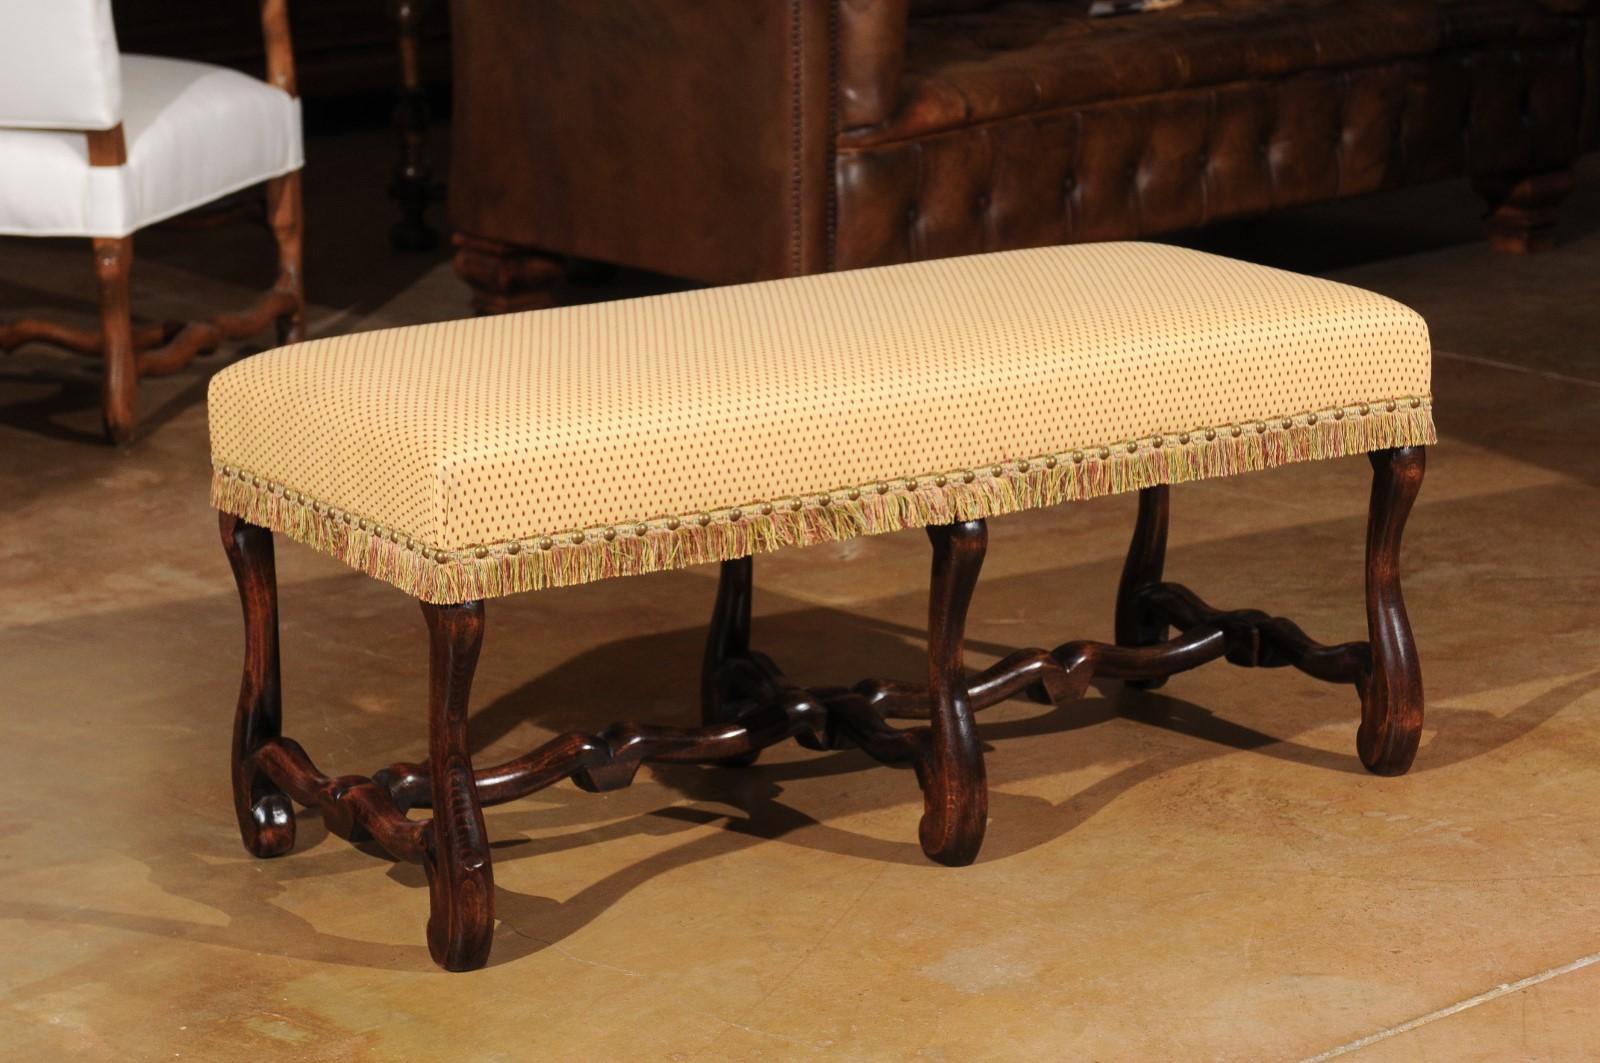 A French Louis XIII style walnut bench from the third quarter of the 19th century, with 'os de mouton' base and upholstery. Born during the reign of Emperor Napoleon III, this exquisite French bench features a rectangular seat covered with a soft